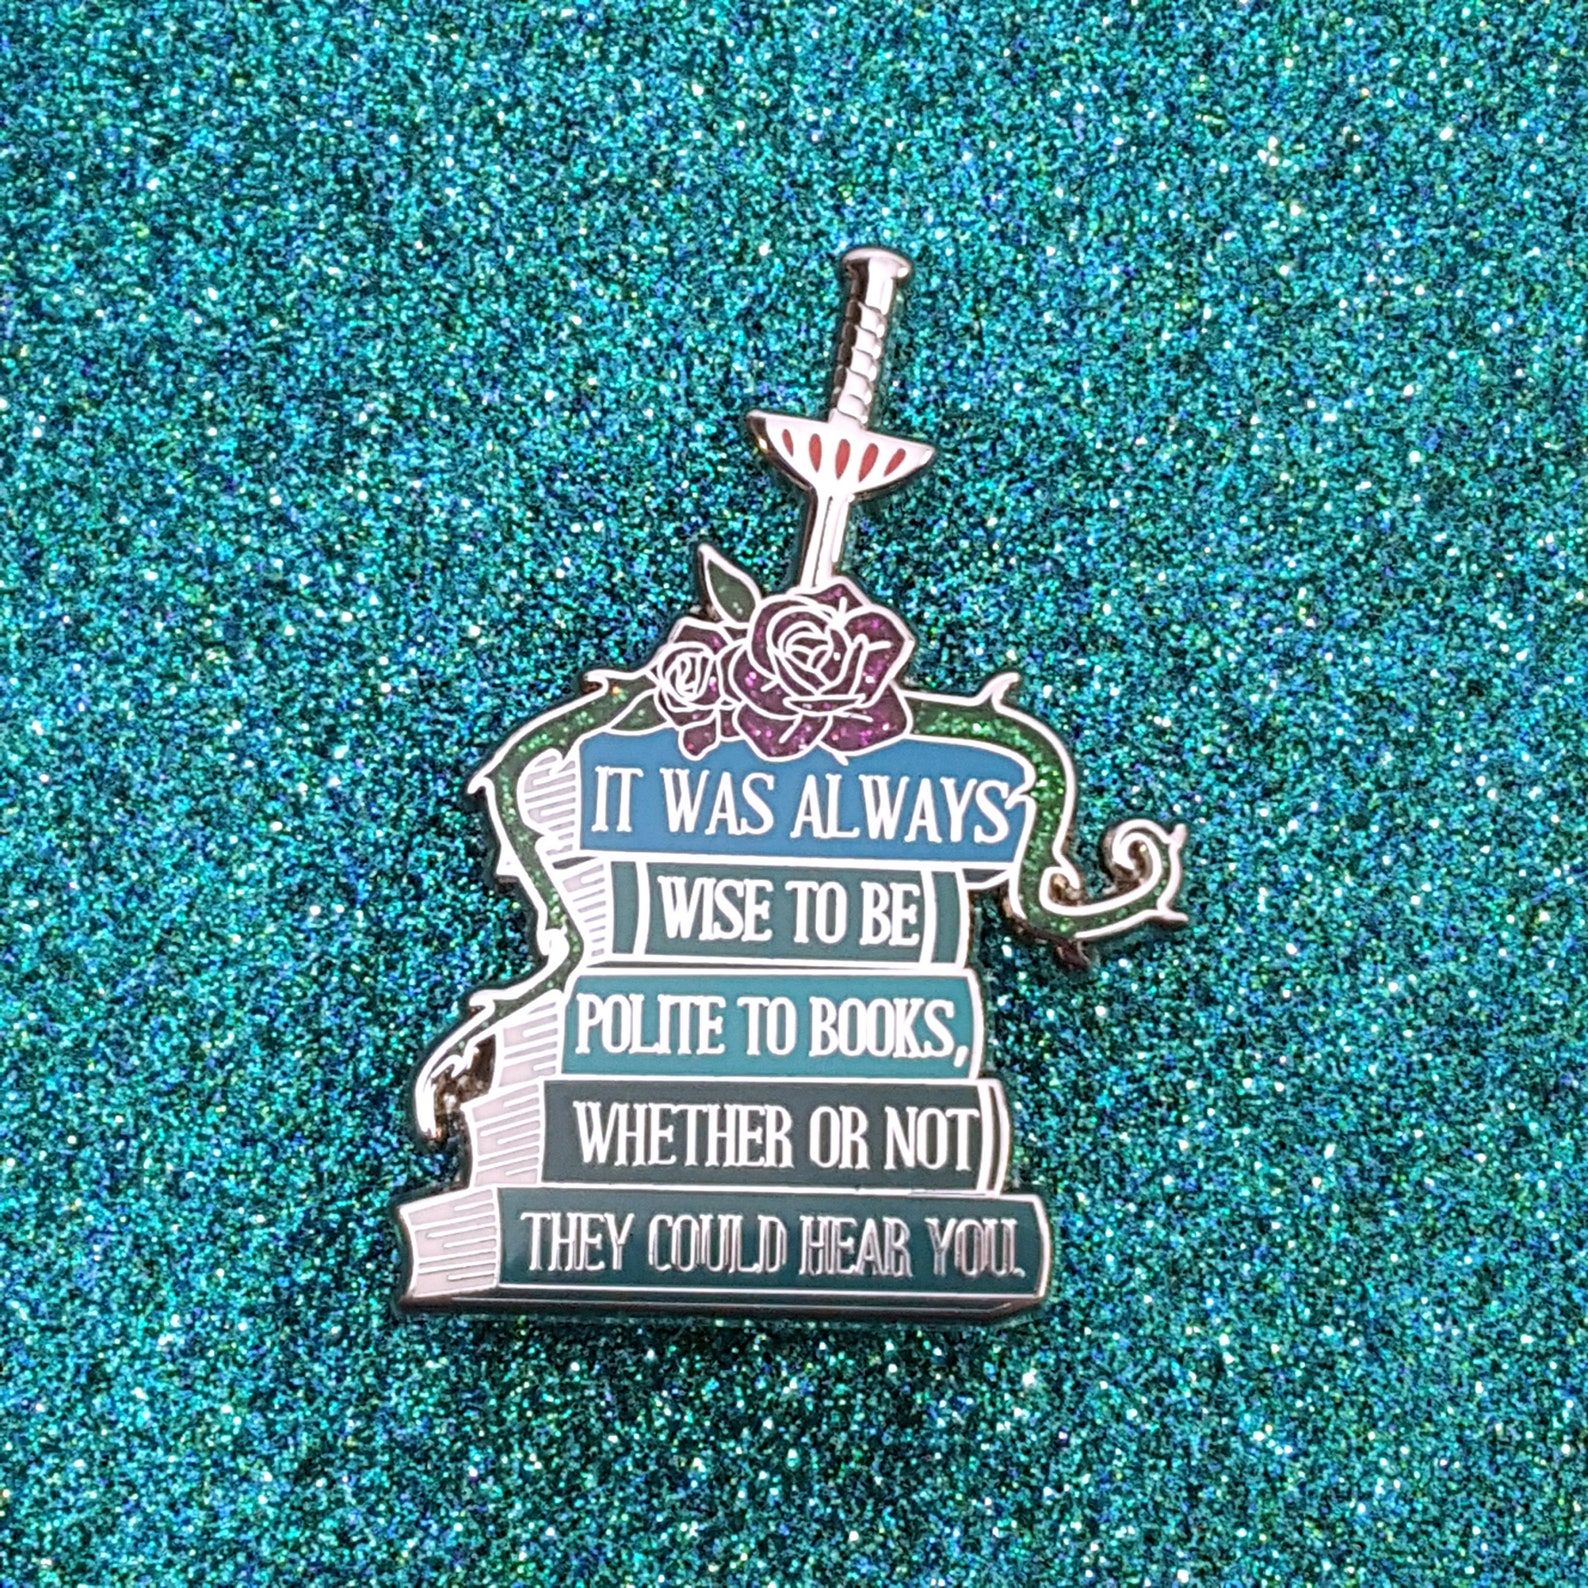 An enamel pin in the shape of a stack of books with the text on spines reading "It's always wise to be polite to books, whether or not they could hear you"